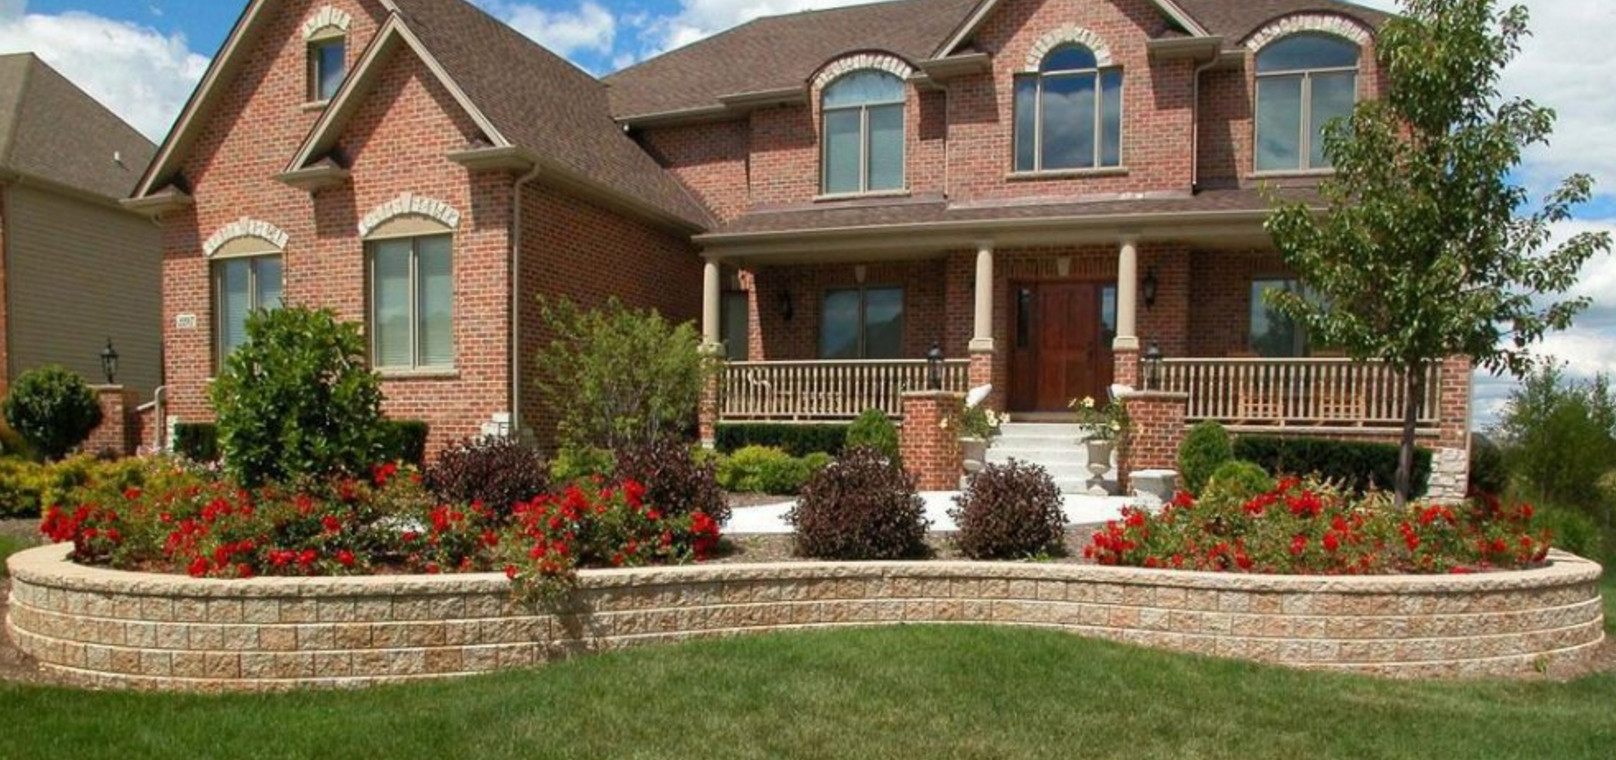 Front Yard Landscape Photos
 Incredible Landscaping Ideas to Transform your Front Yard